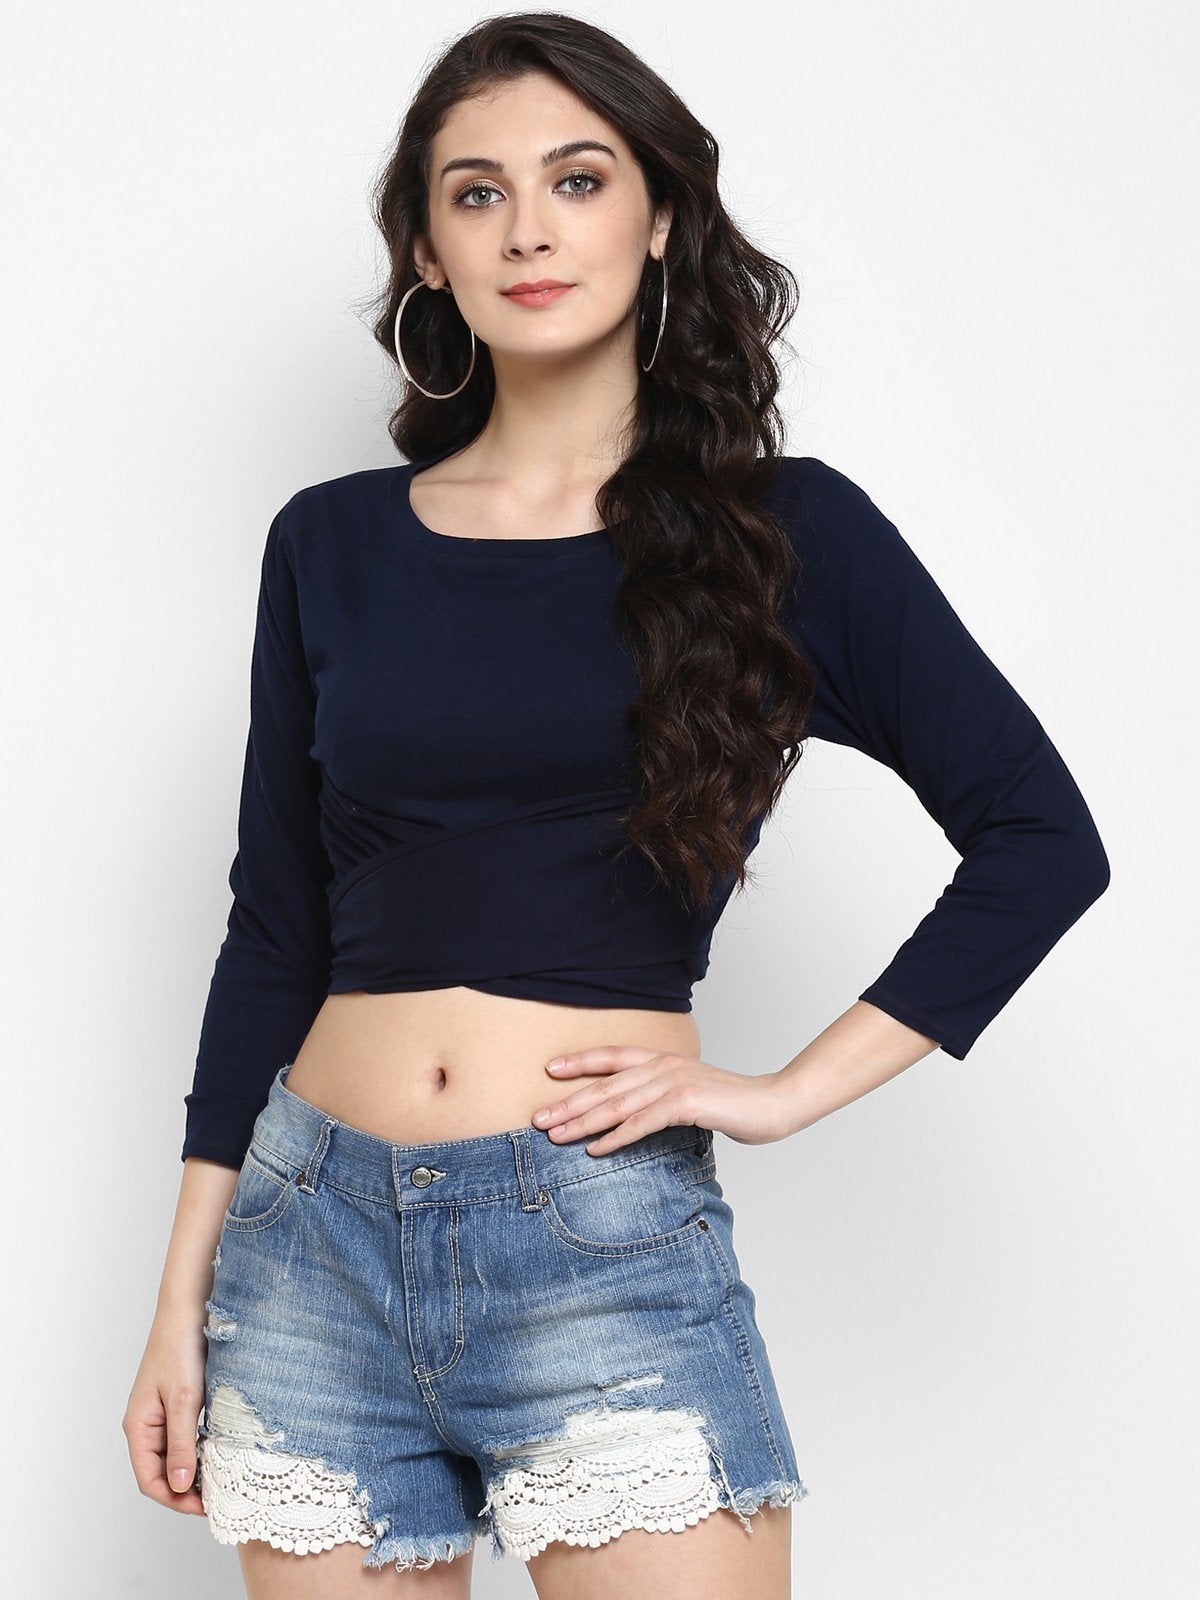 Women's Knitted Knot Style Crop Top - Pannkh